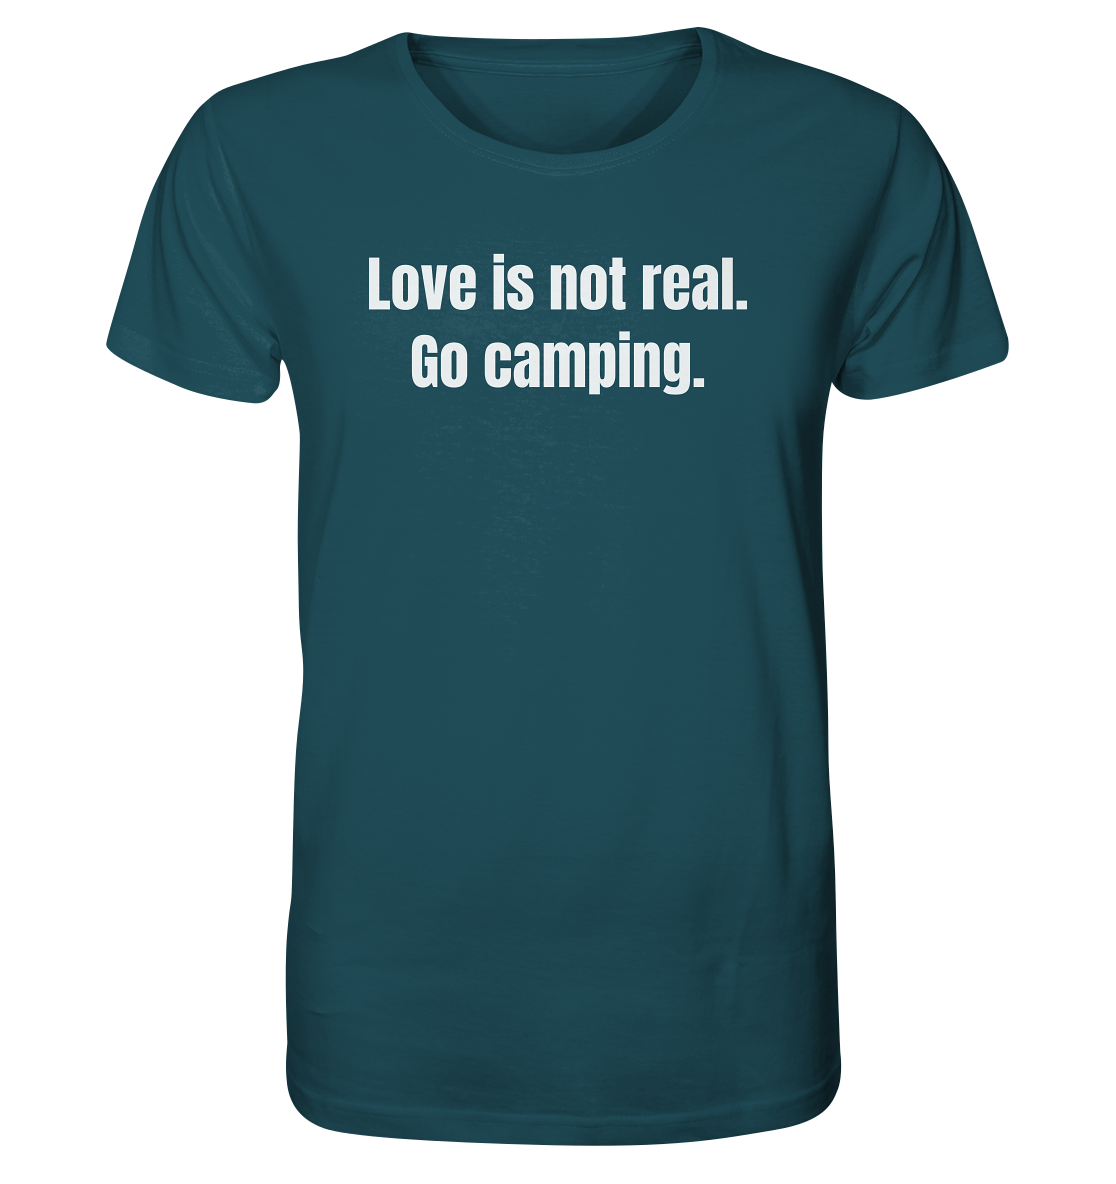 Love is not real. Go camping. - Organic Shirt